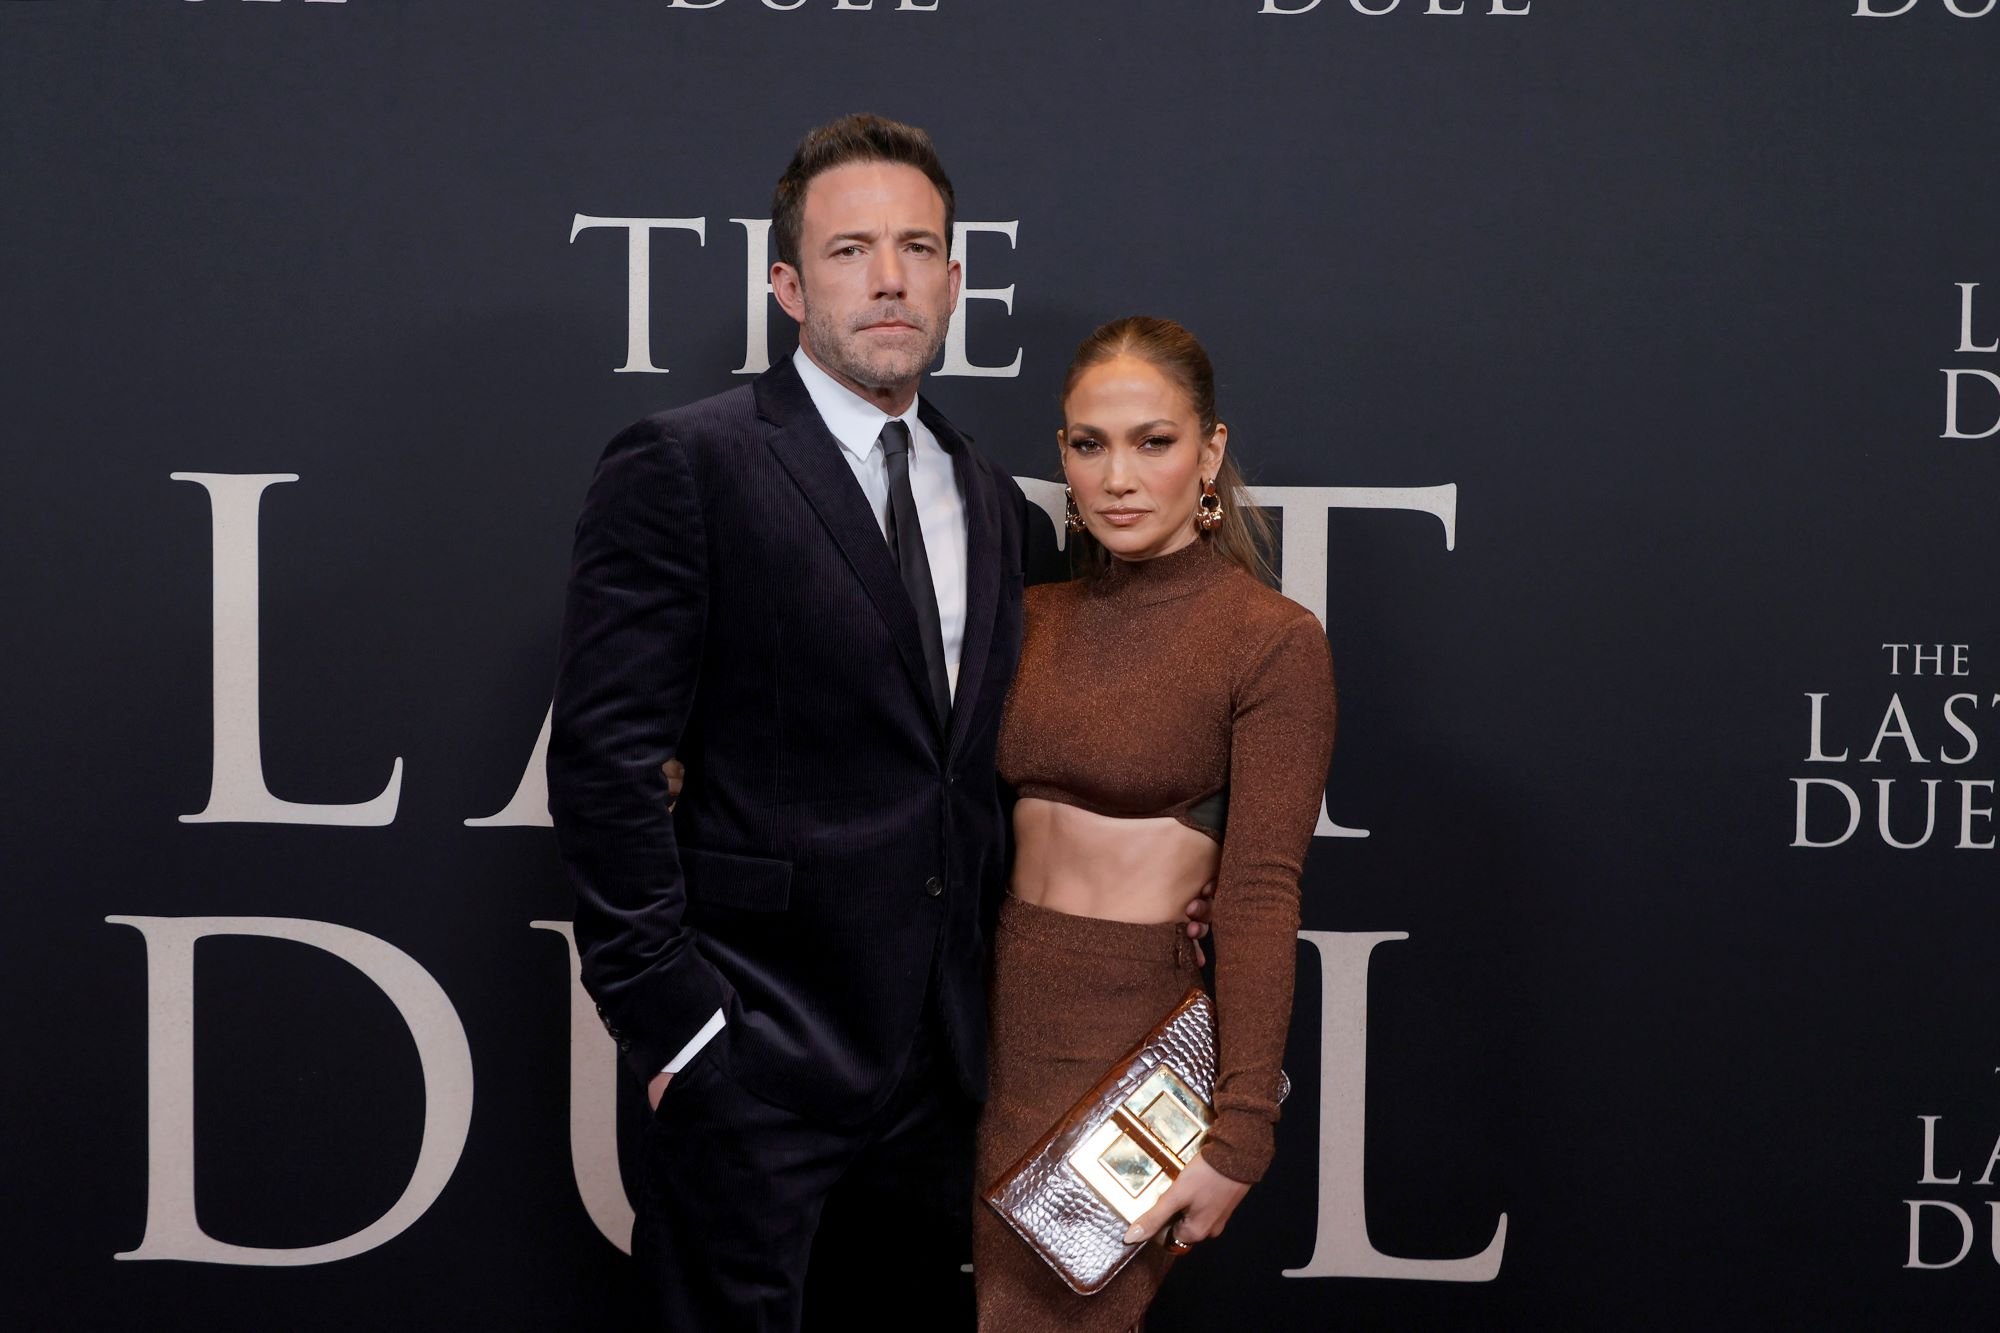 Jennifer Lopez dressed in a brown dress with a gold belt and Ben Affleck dressed in a black suit with a white shirt and a black tie in front of a black background with ivory writing.